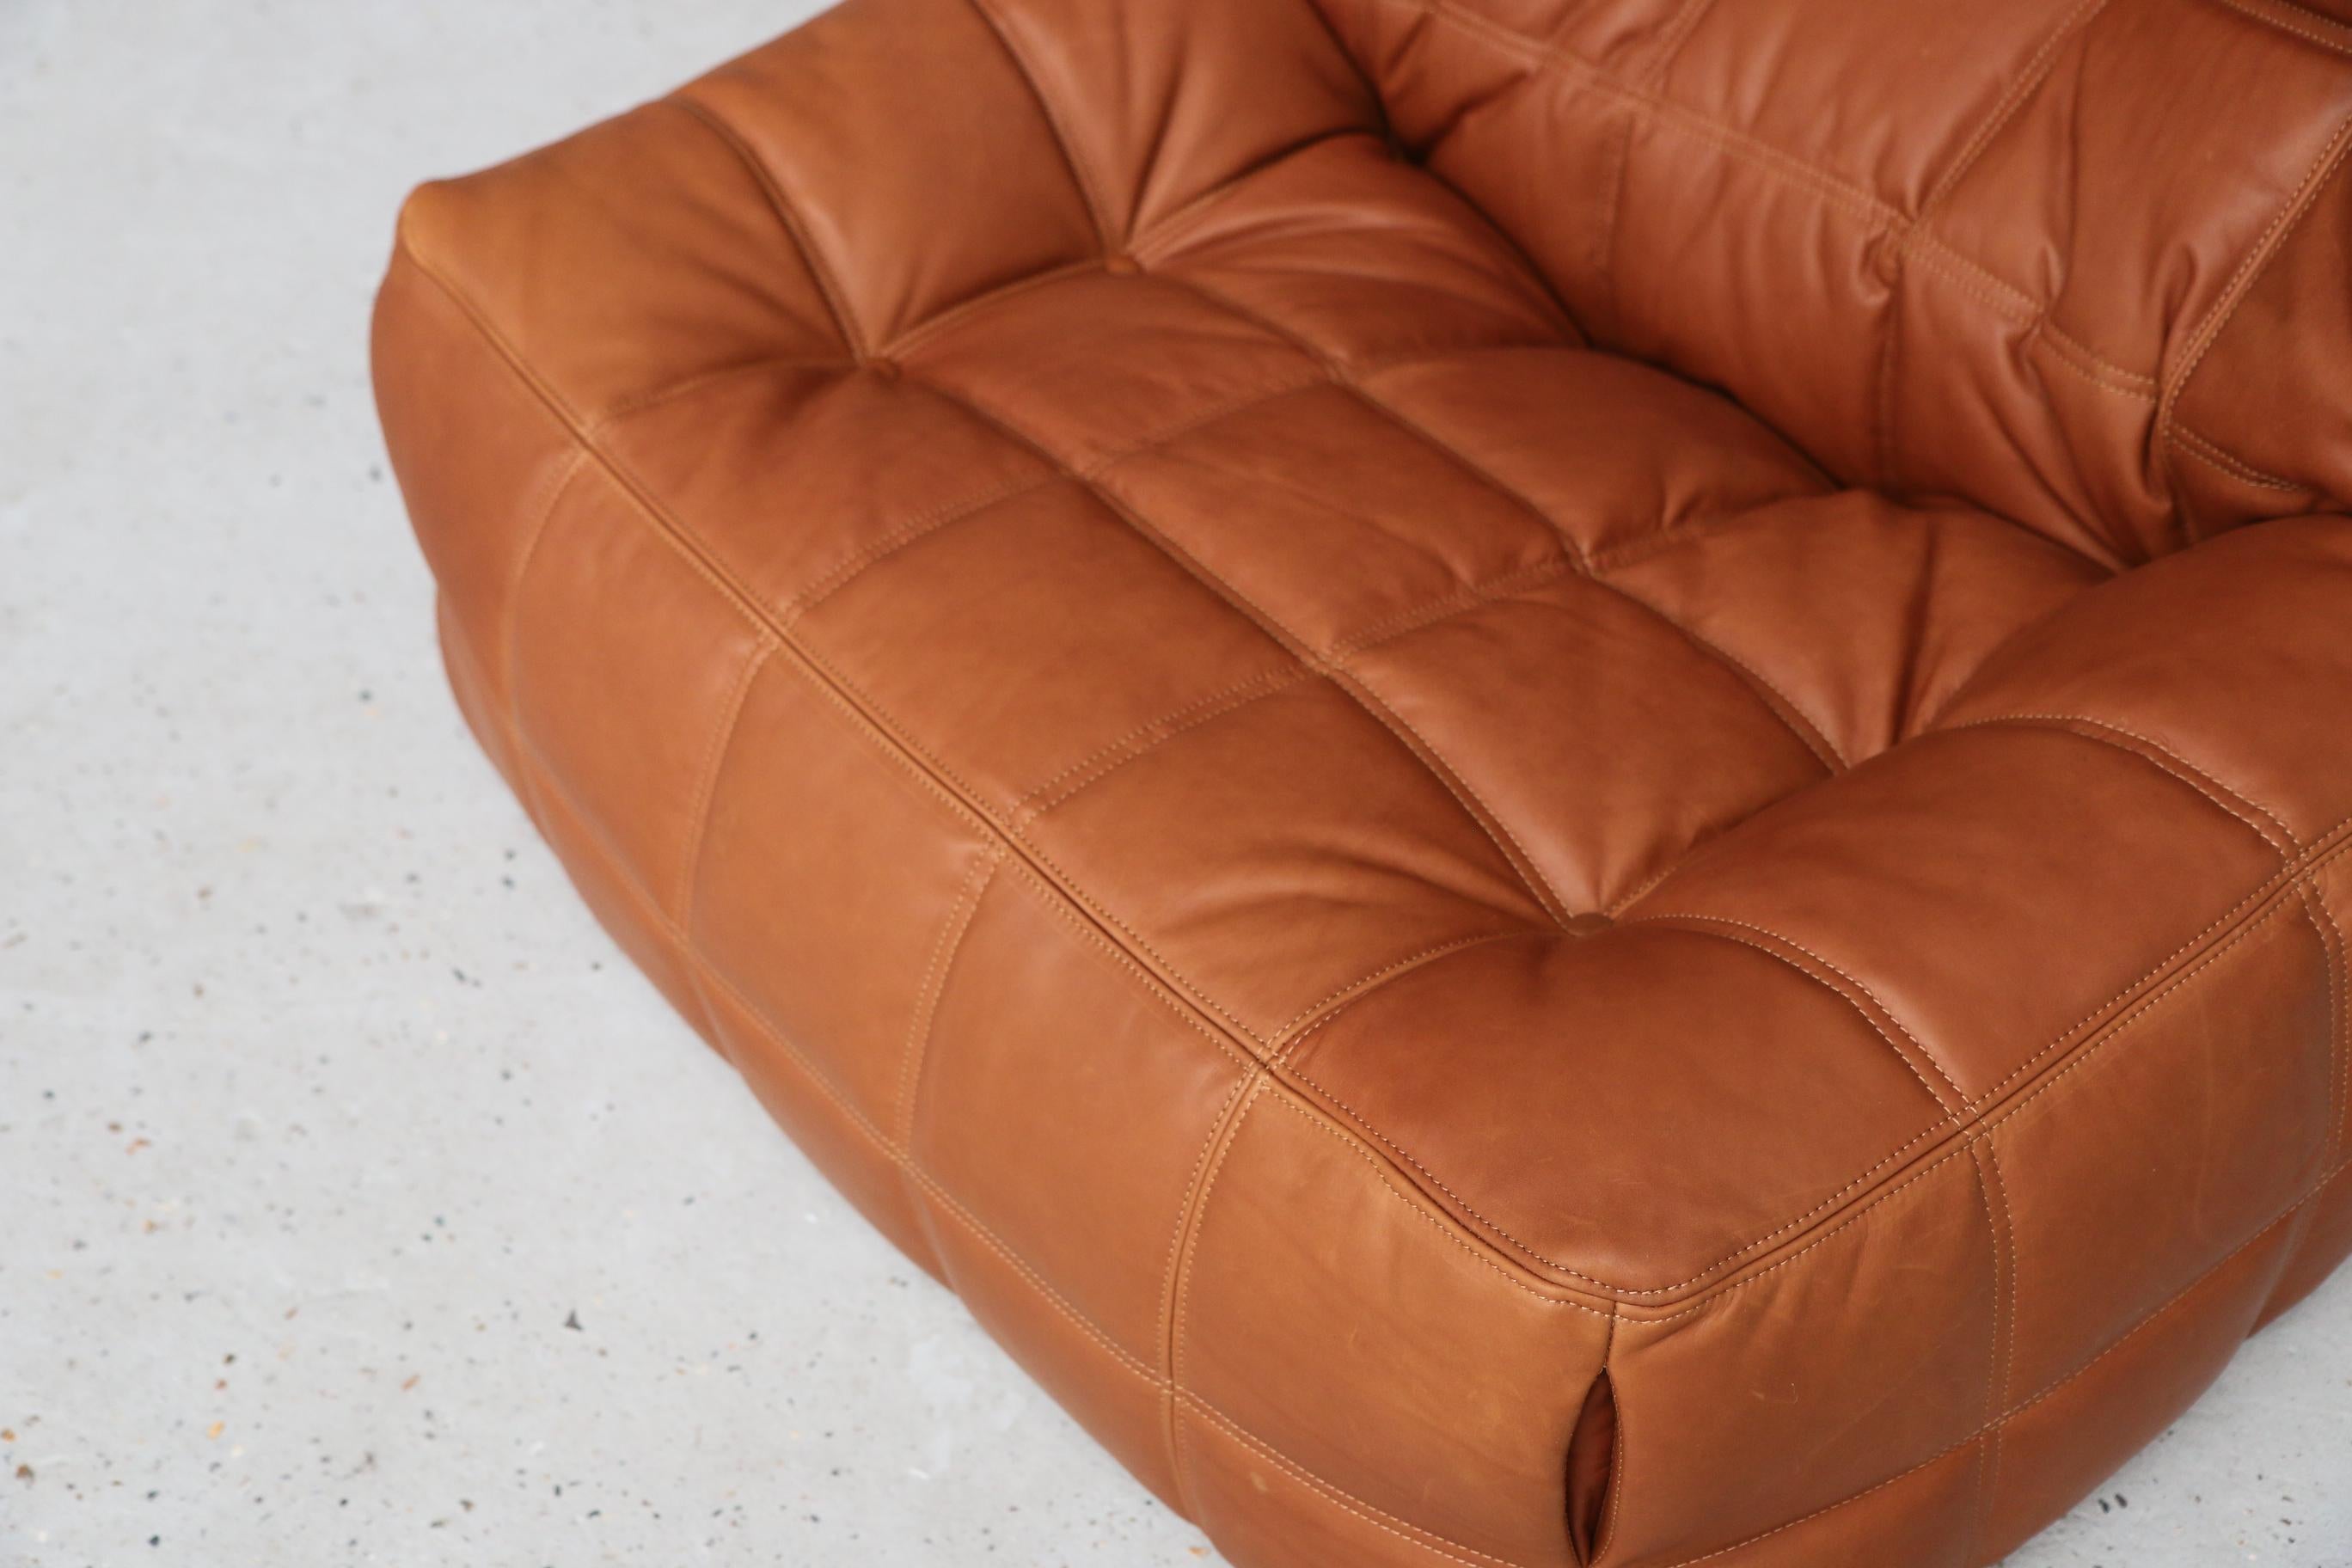 Late 20th Century Kashima Lounge Chair in Cognac Full Grain Natural Leather for Ligne Roset France